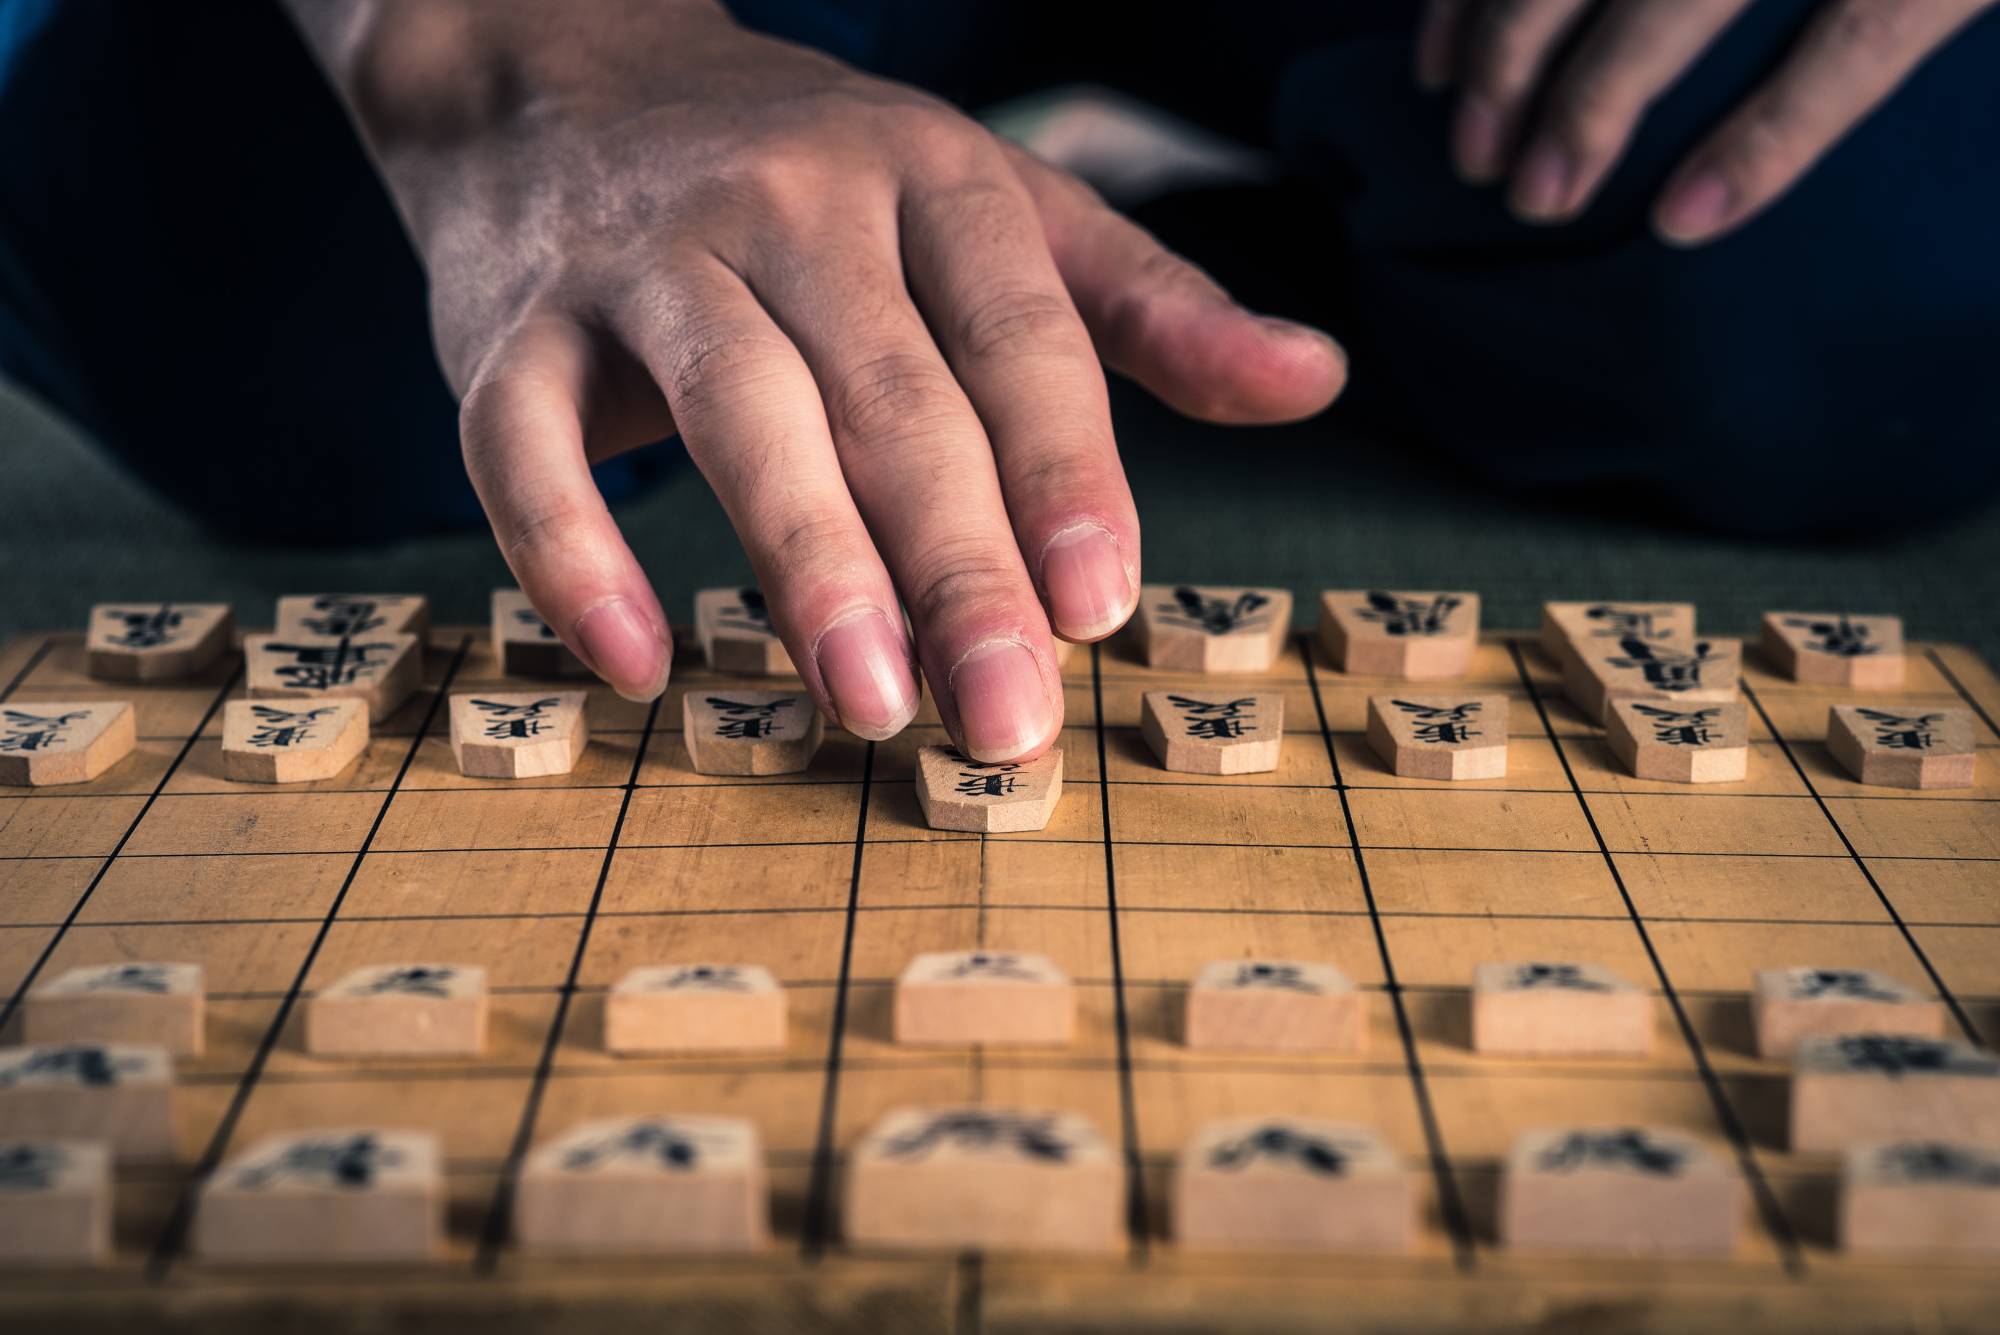 About 6.2 million people in Japan played shogi in 2019, and the Japan Shogi Association has 55 branches overseas. | GETTY IMAGES